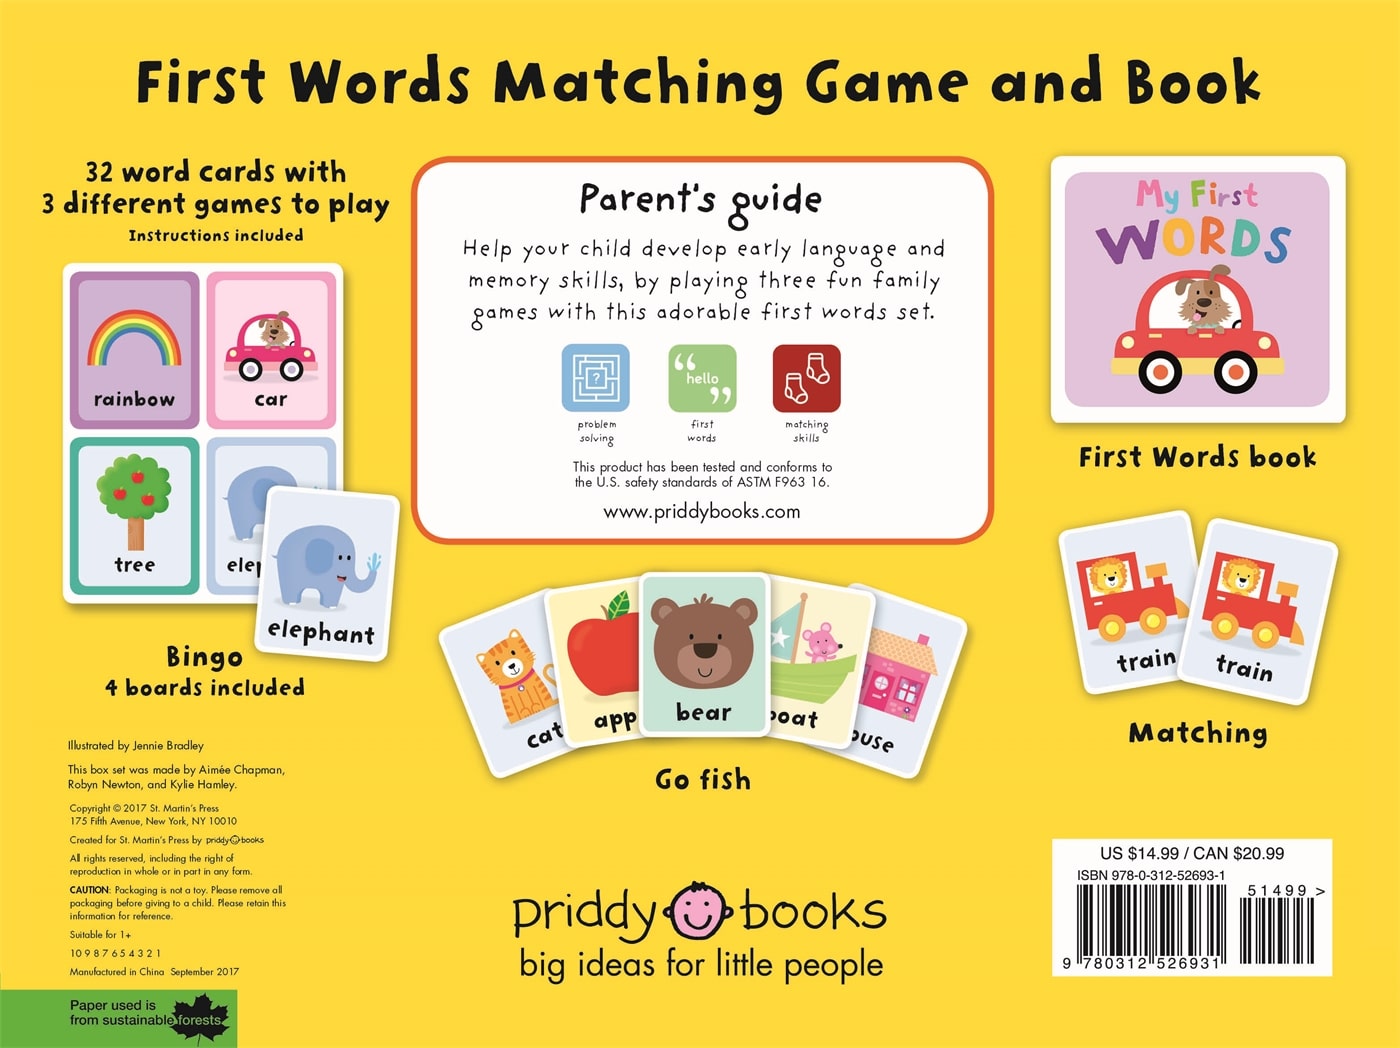 my-first-words-matching-game-and-book-set_1209899.jpg